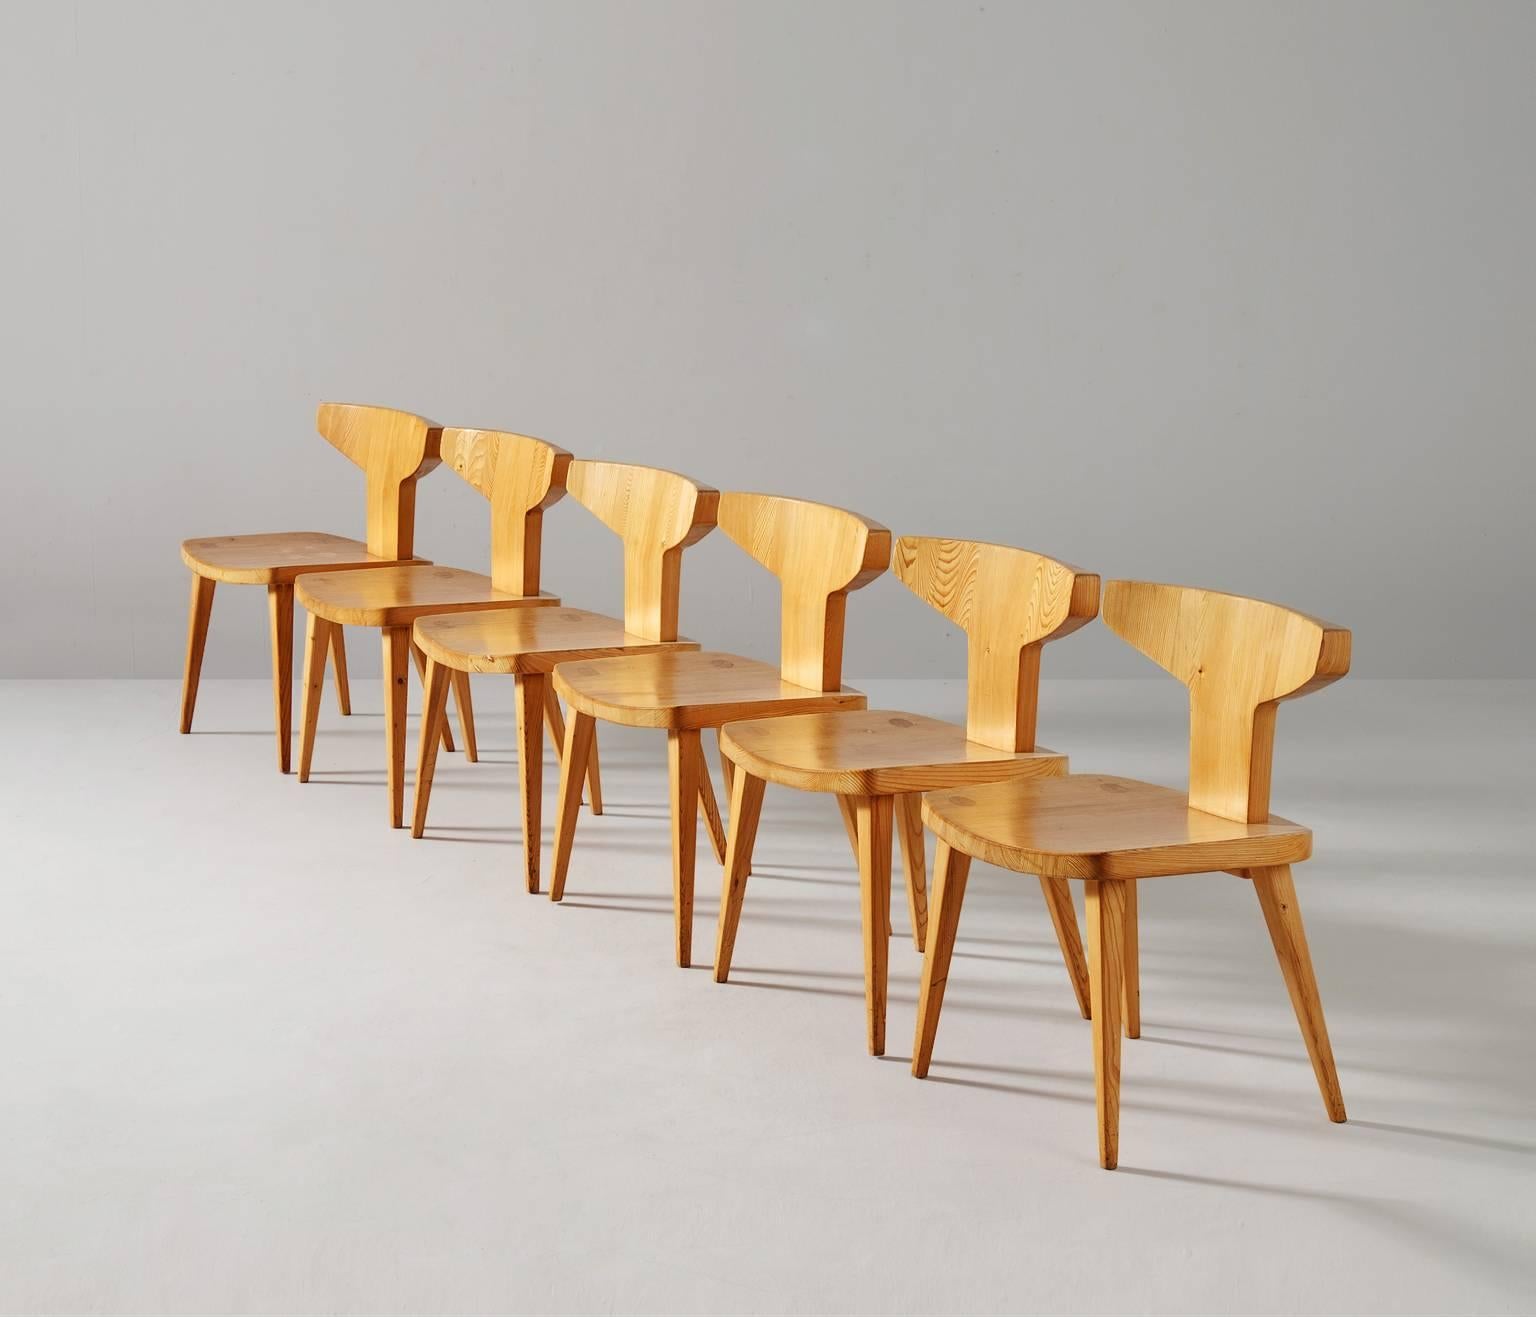 Set of six dining chairs in solid pine designed by Jacob Kielland-Brandt, Denmark, 1960s.

This remarkable set holds a strong expression and this organic shaped design is in well contrast with the solid high tapered legs which provides an open